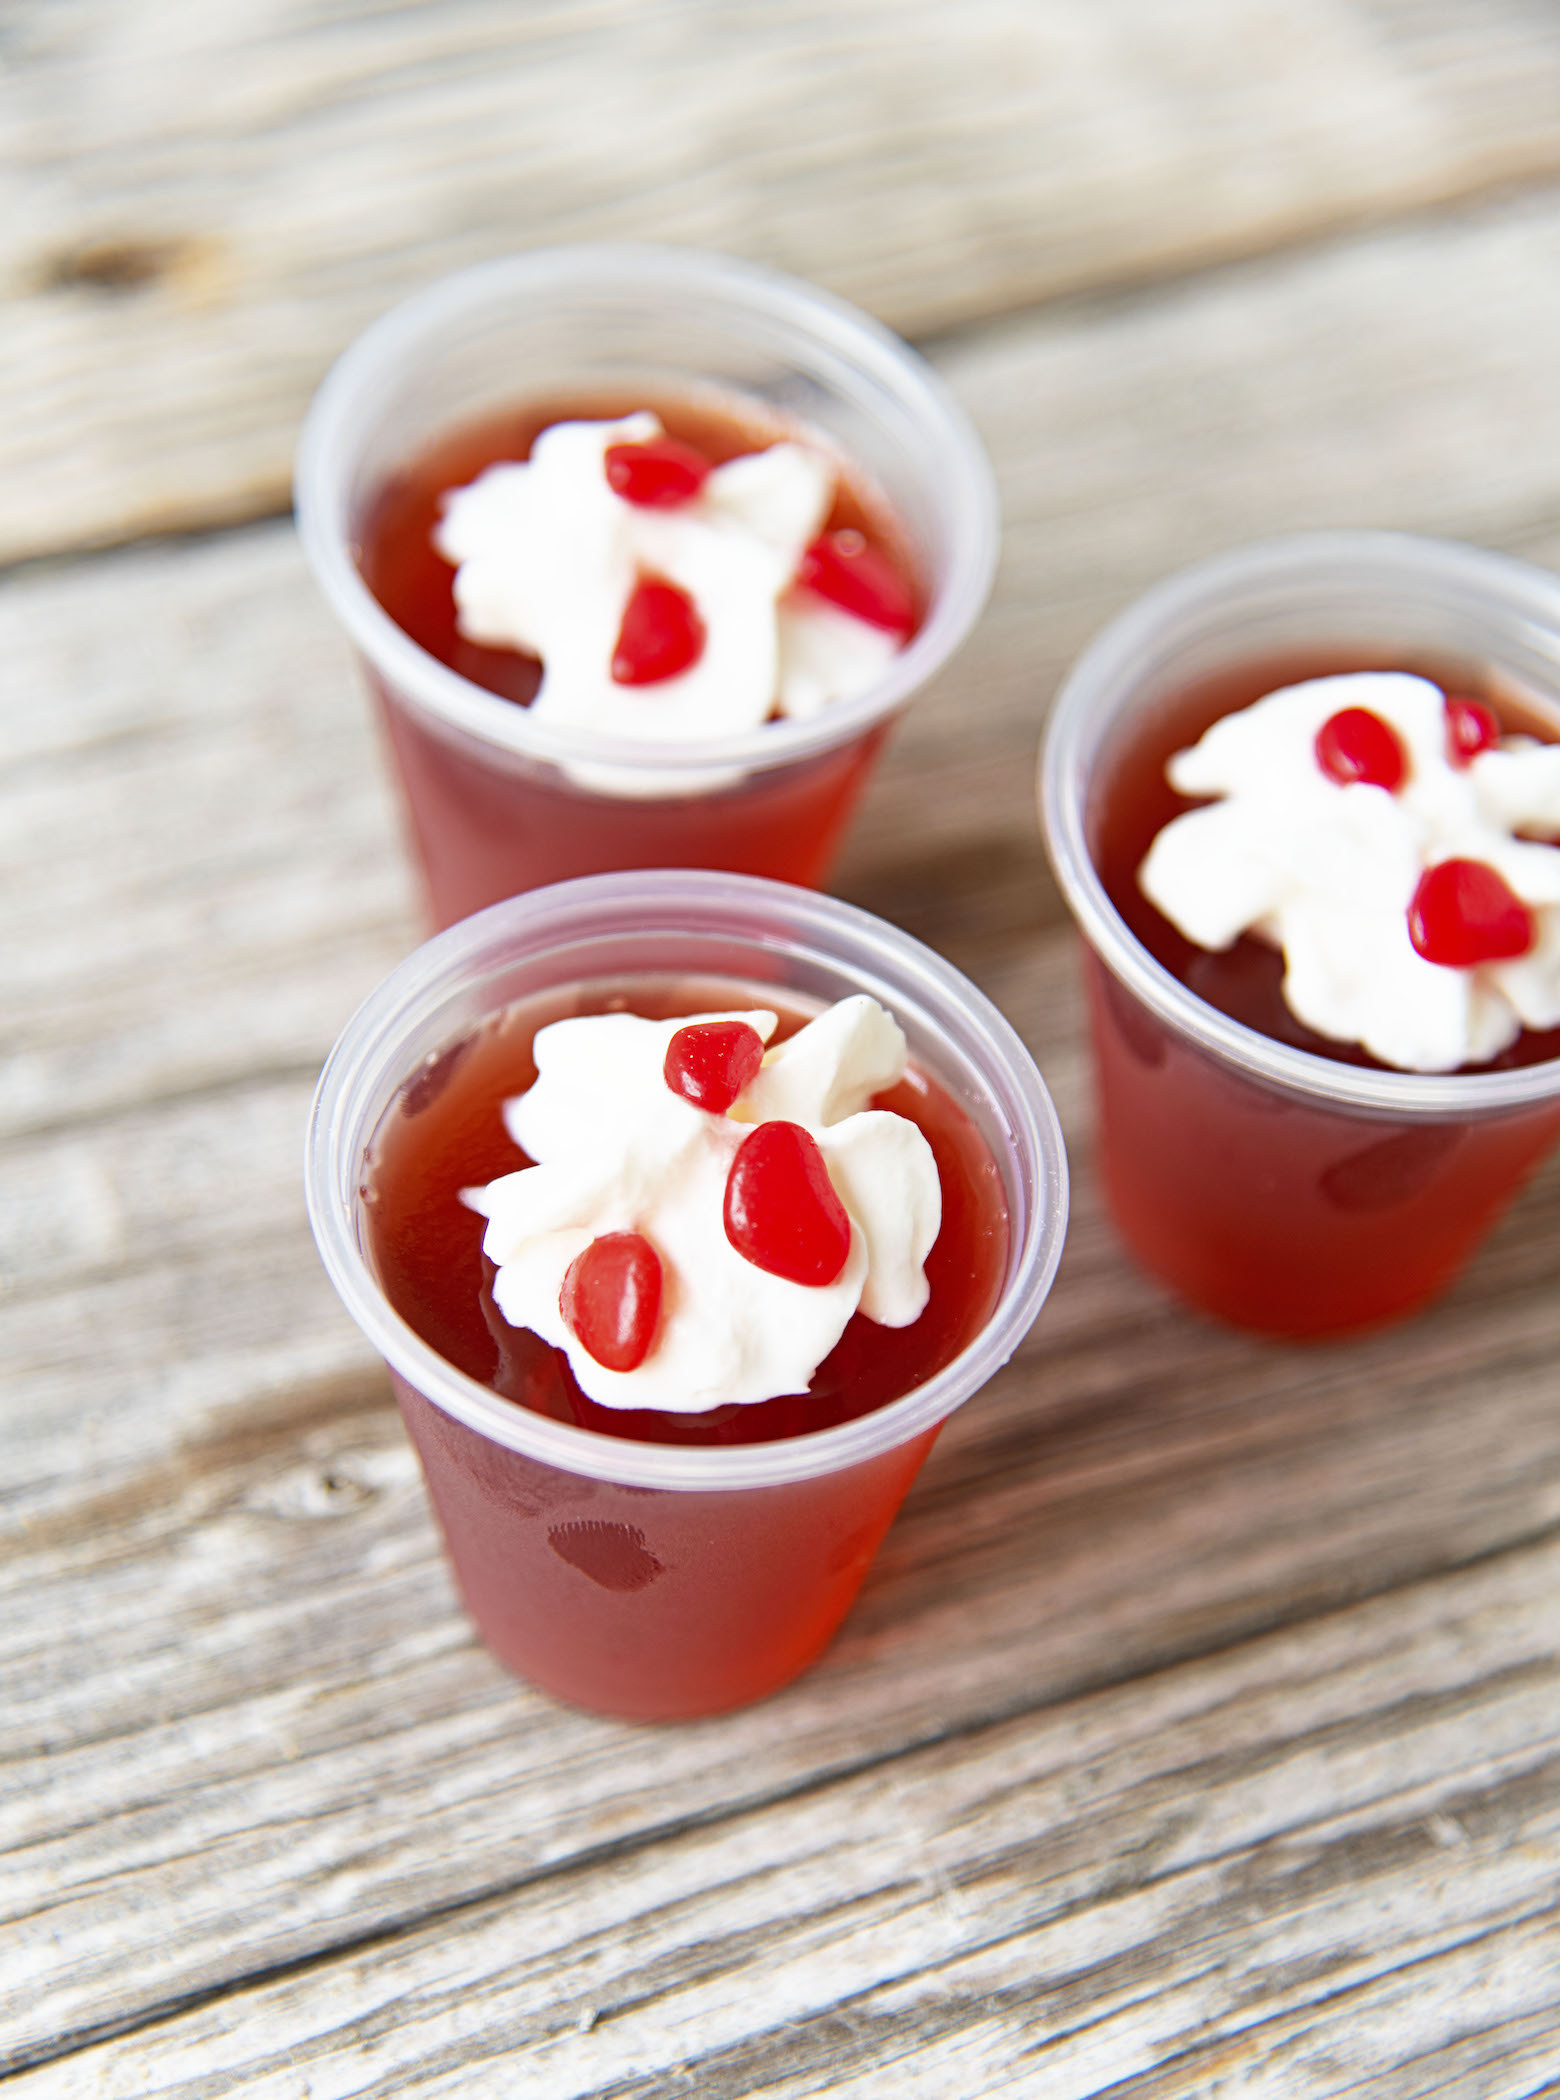 Three Cinnamon Candied Apple Jello Shots gathered together topped with whipped cream and cinnamon red hots candies.